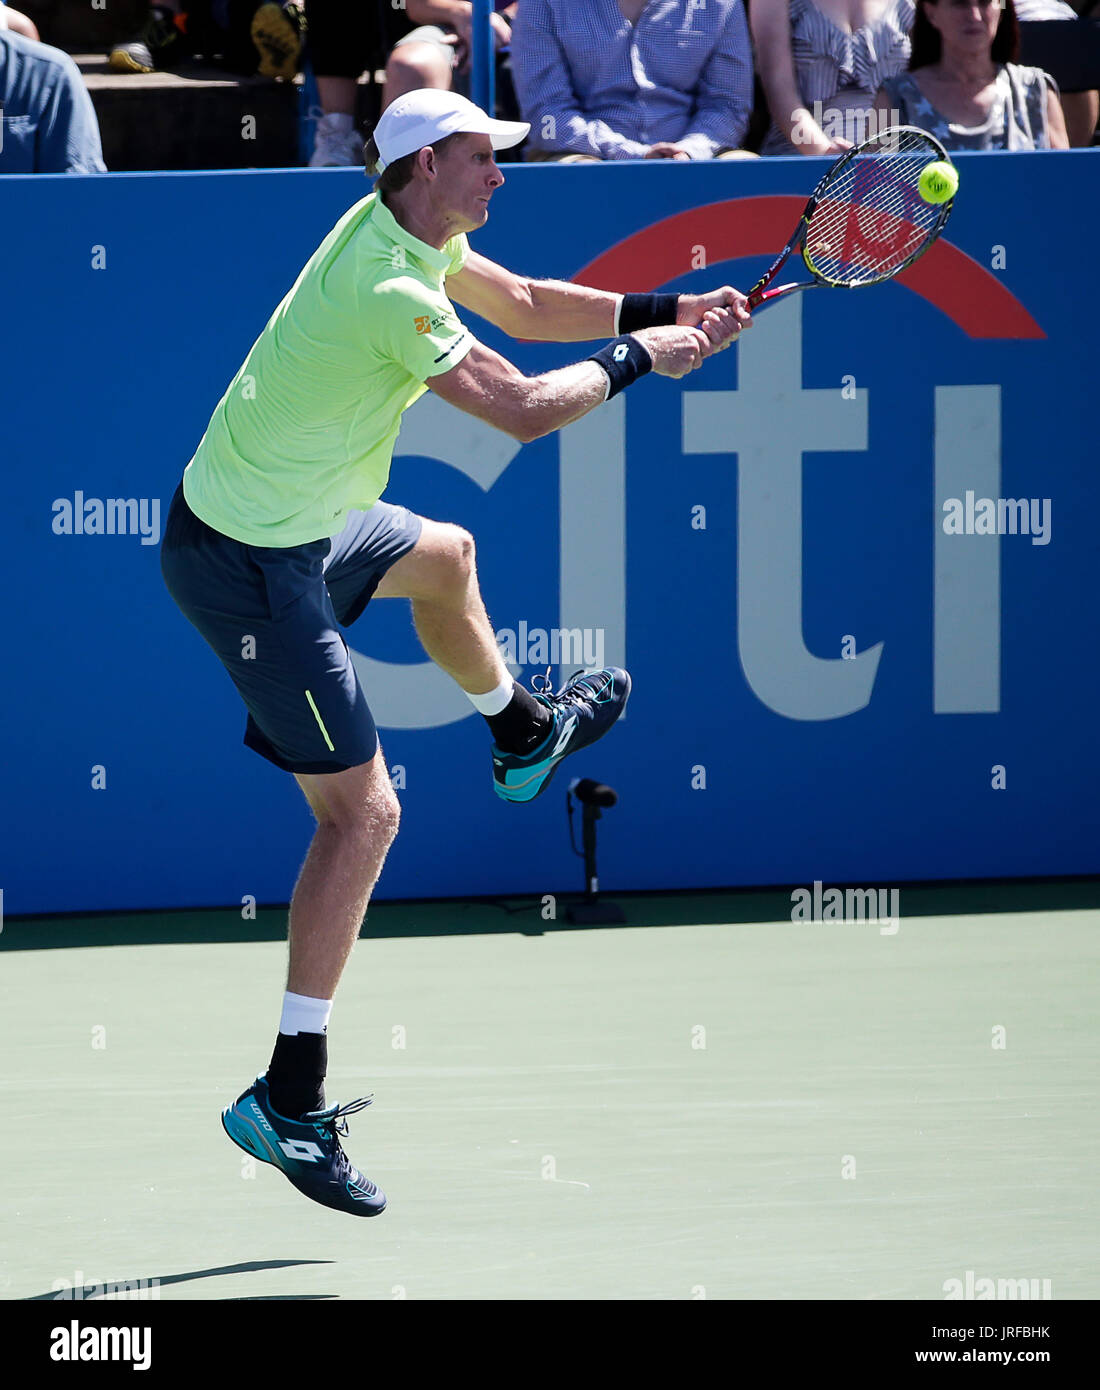 August 5, 2017: Kevin Anderson (RSA) kicks his leg up during a forehand shot during a semi final match at the 2017 Citi Open tennis tournament being played at Rock Creek Park Tennis Center in Washington, DC Justin Cooper/CSM Stock Photo